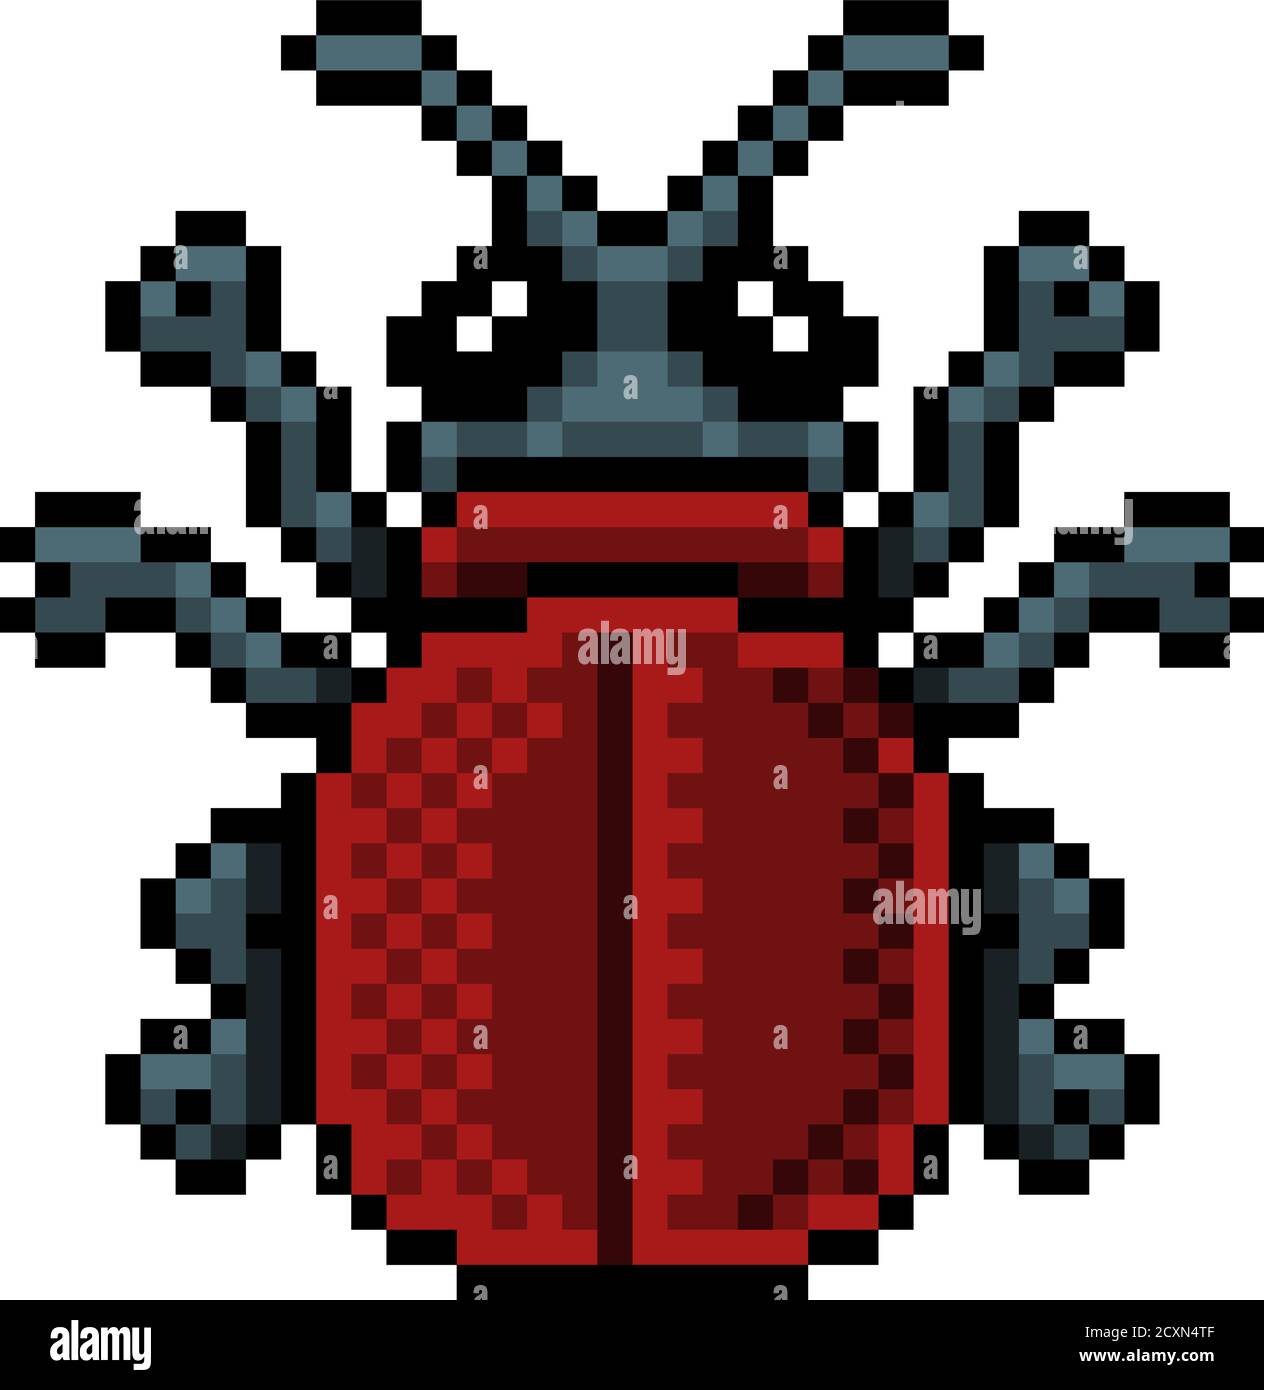 Bug Beetle Insect Pixel Art Video Game 8 Bit Icon Stock Vector